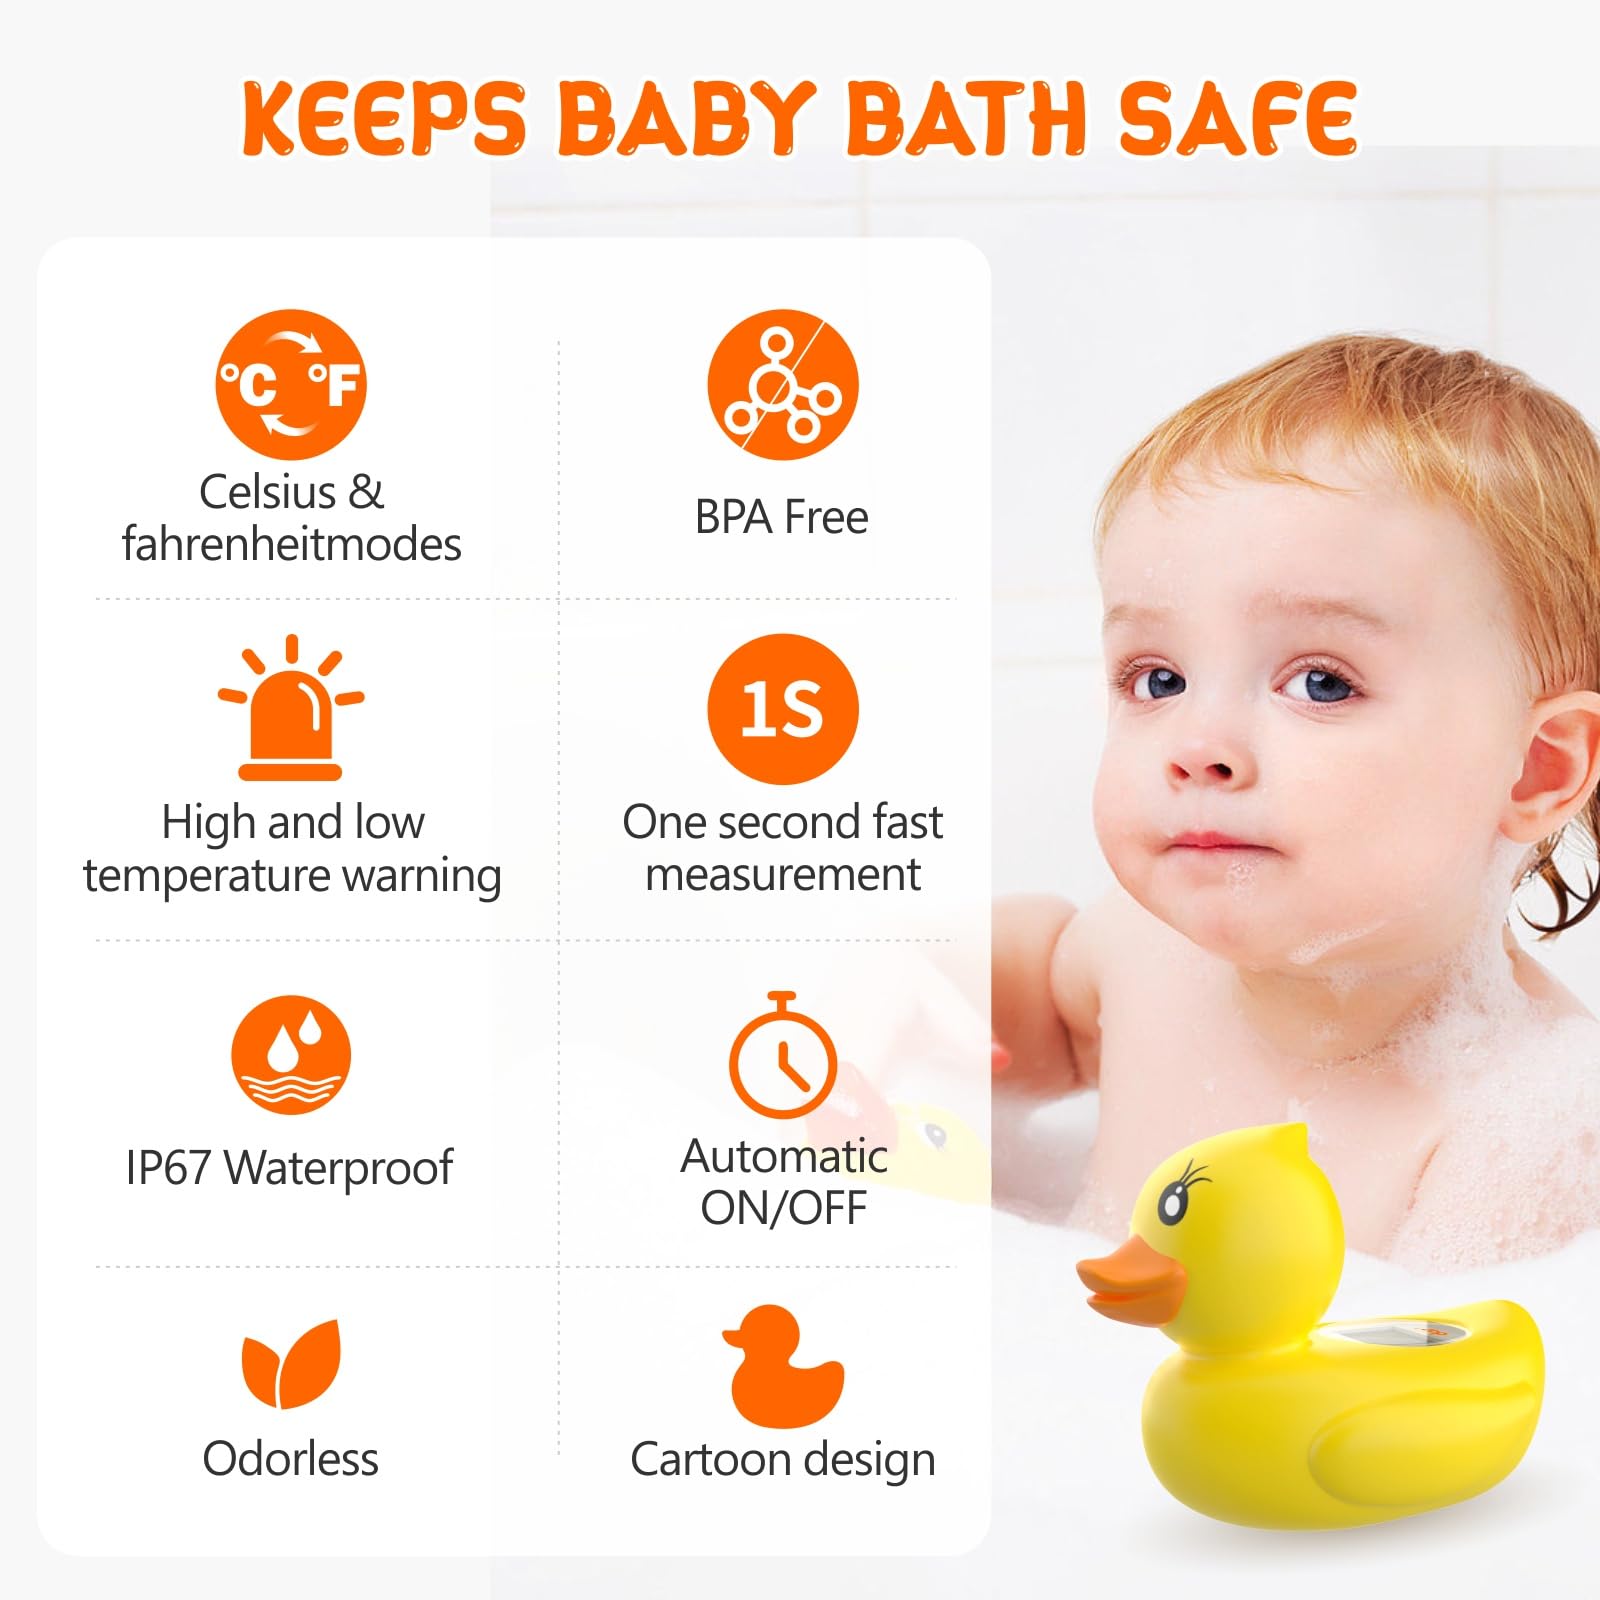 dar darouxiao Baby Bath Thermometer,Water Thermometer with Backlight Display and Temperature Warning,Bathtub Floating Toys Safety for Infant,Toddler,New Born Bath Essentials (Duck)